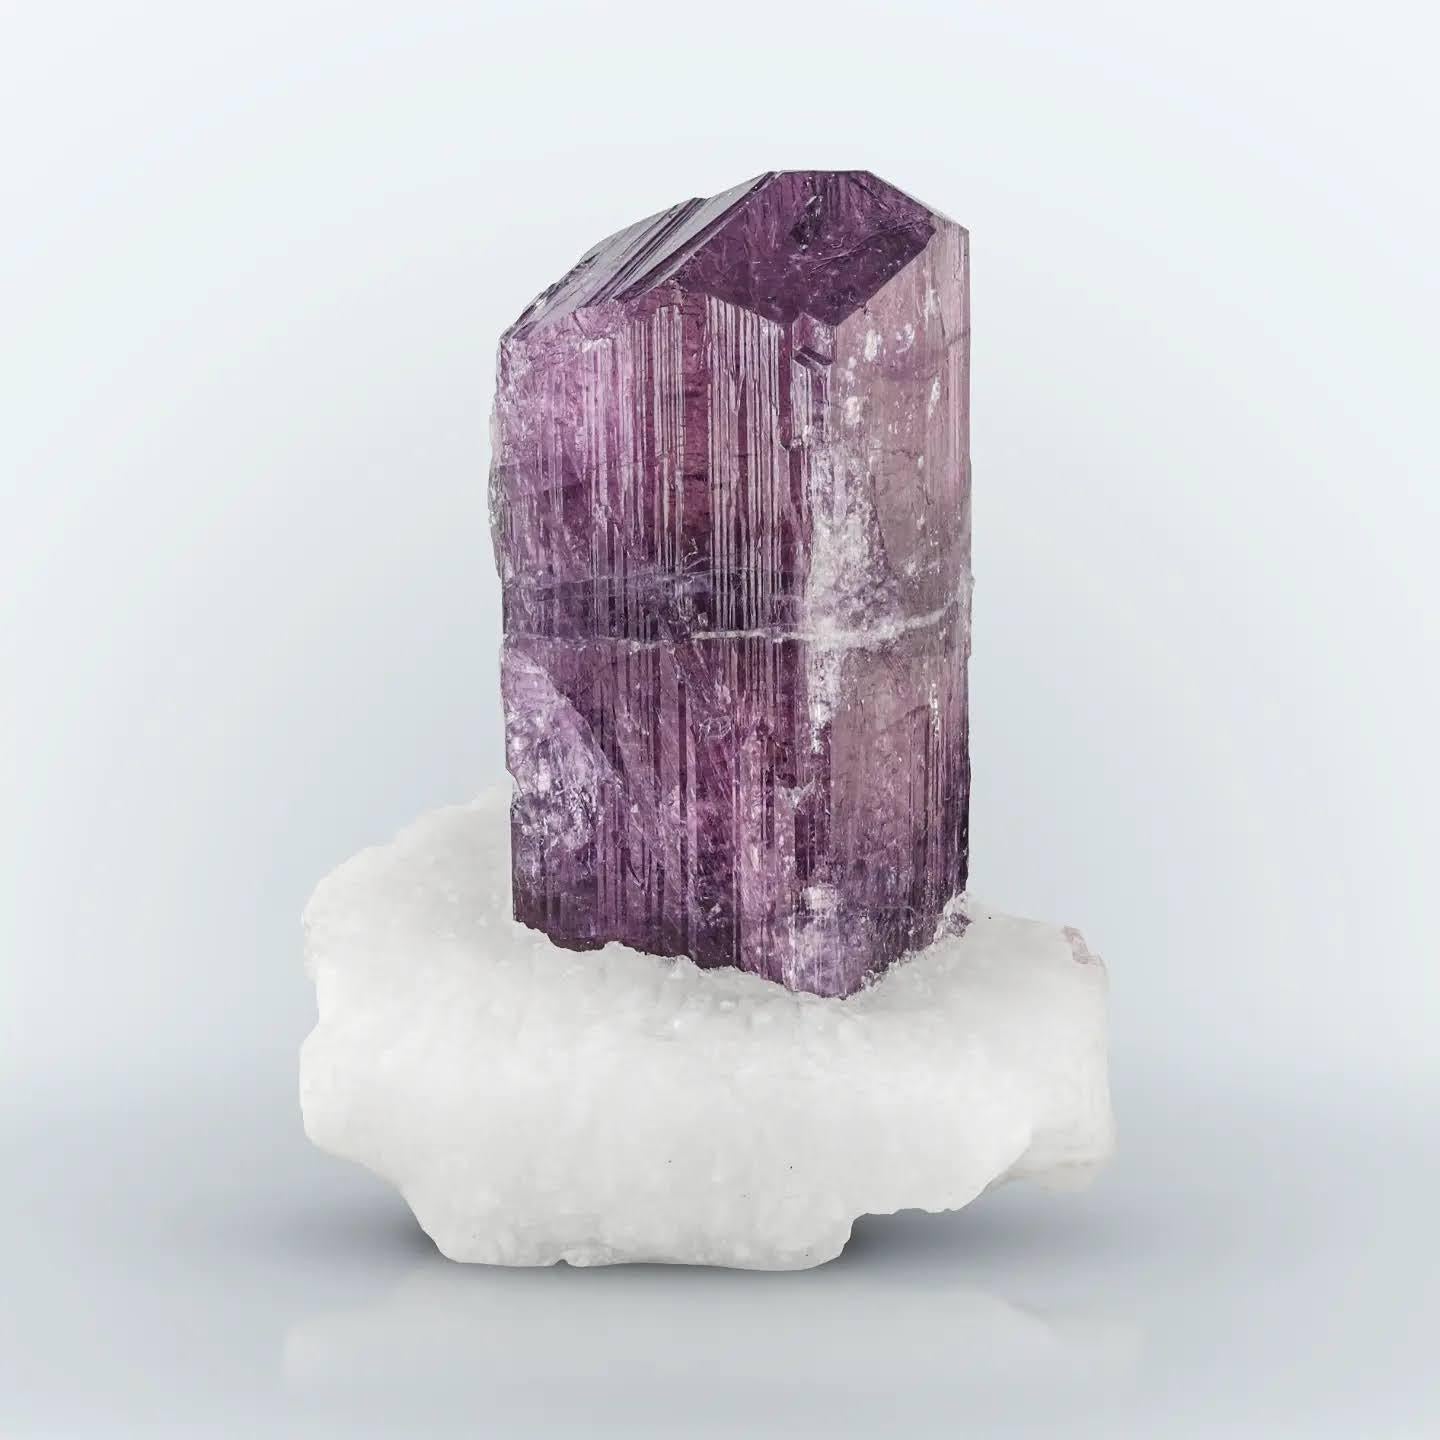 Art Deco Vibrant Purple Color Scapolite Crystal On Calcite Matrix From Afghanistan For Sale